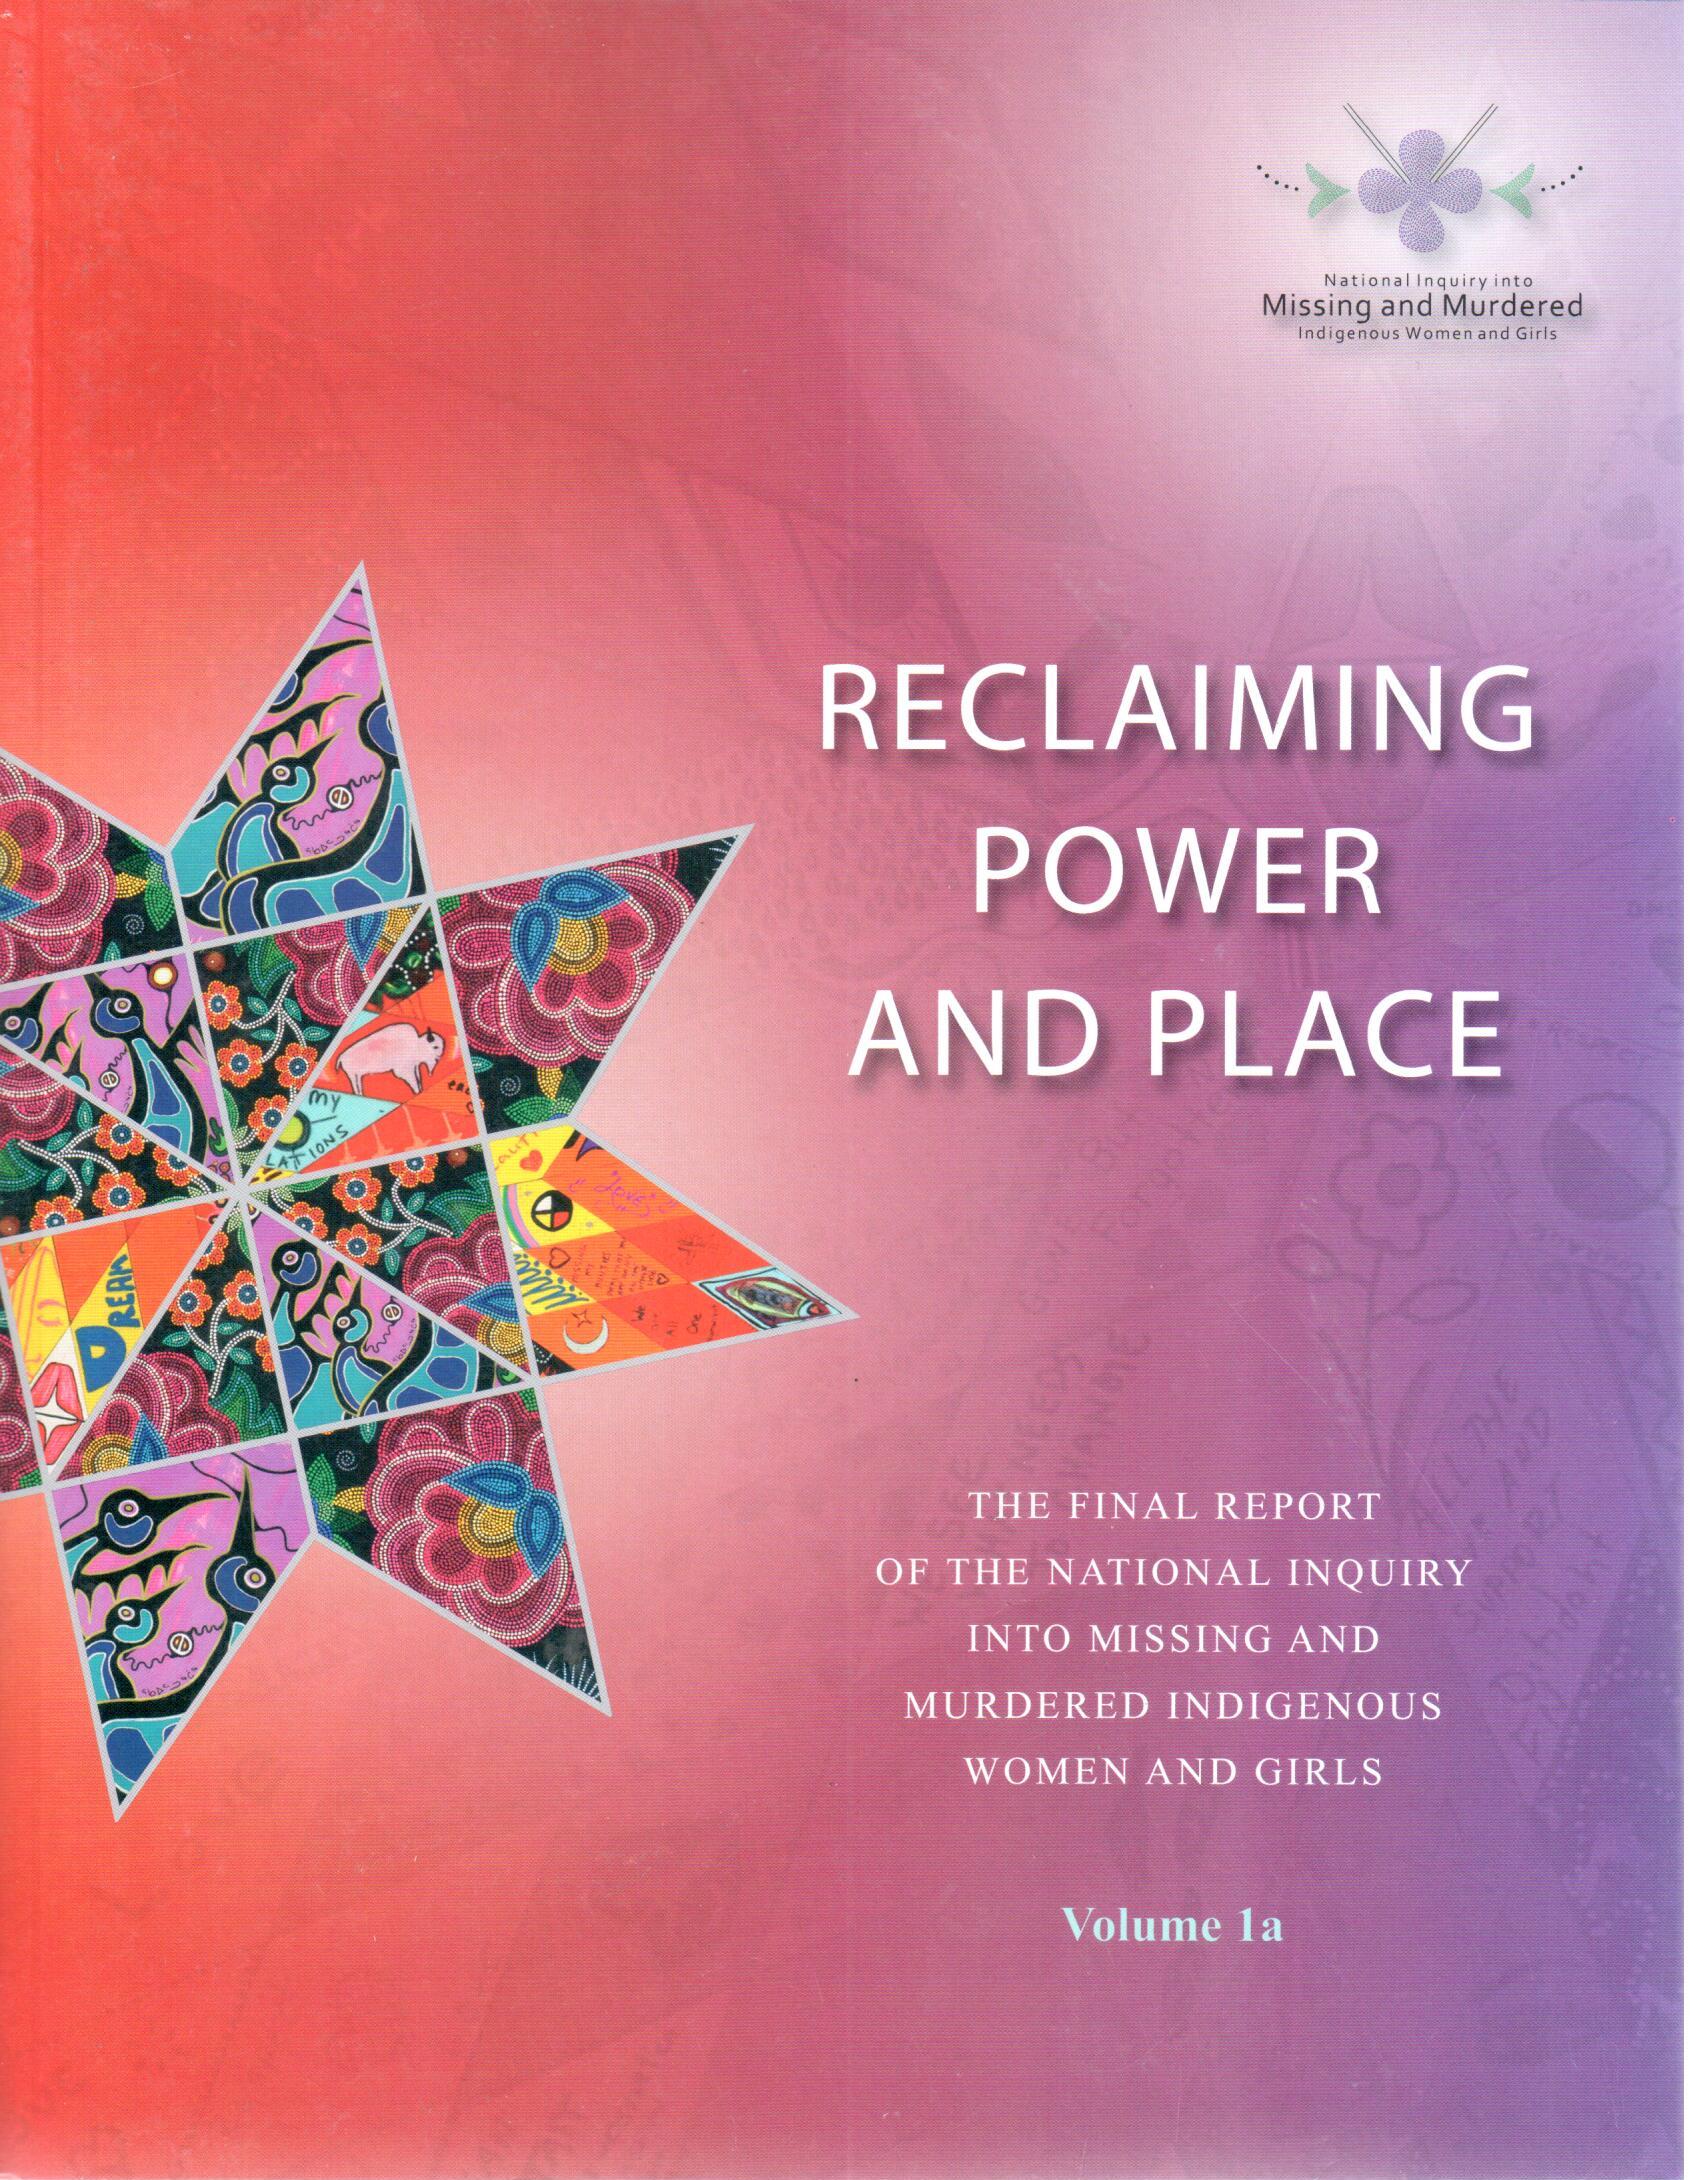 Reclaiming power and place : the final report of the National Inquiry into Missing and Murdered Indigenous Women and Girls - volume 1a.